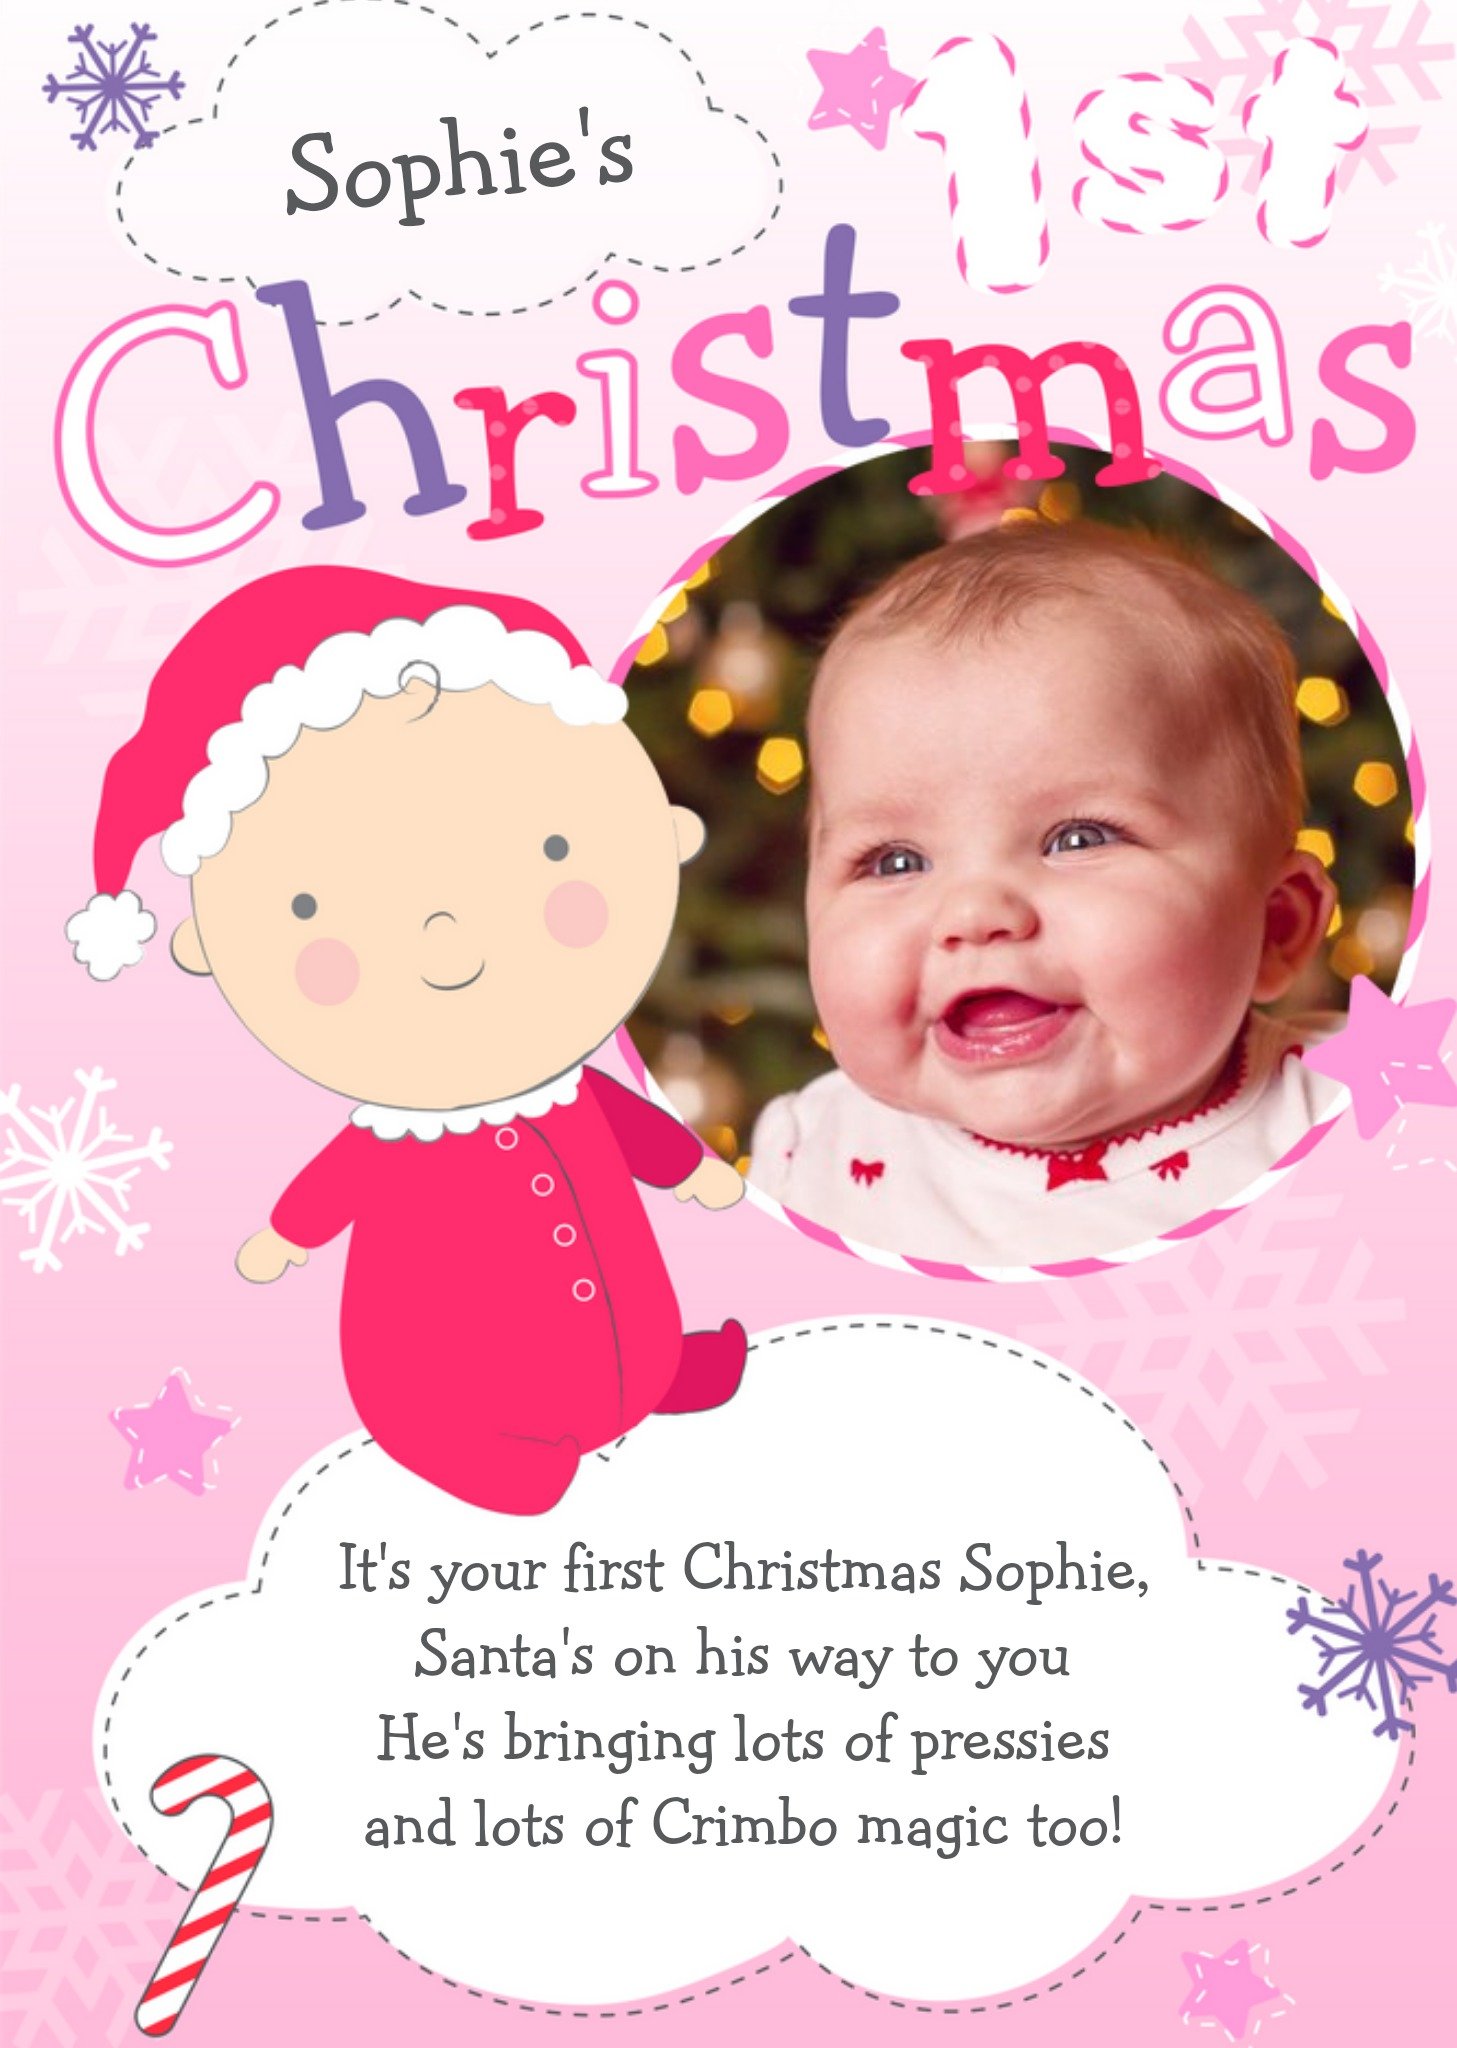 Moonpig Purple And Pink In The Clouds Personalised Photo Upload Baby's 1st Christmas Card Ecard